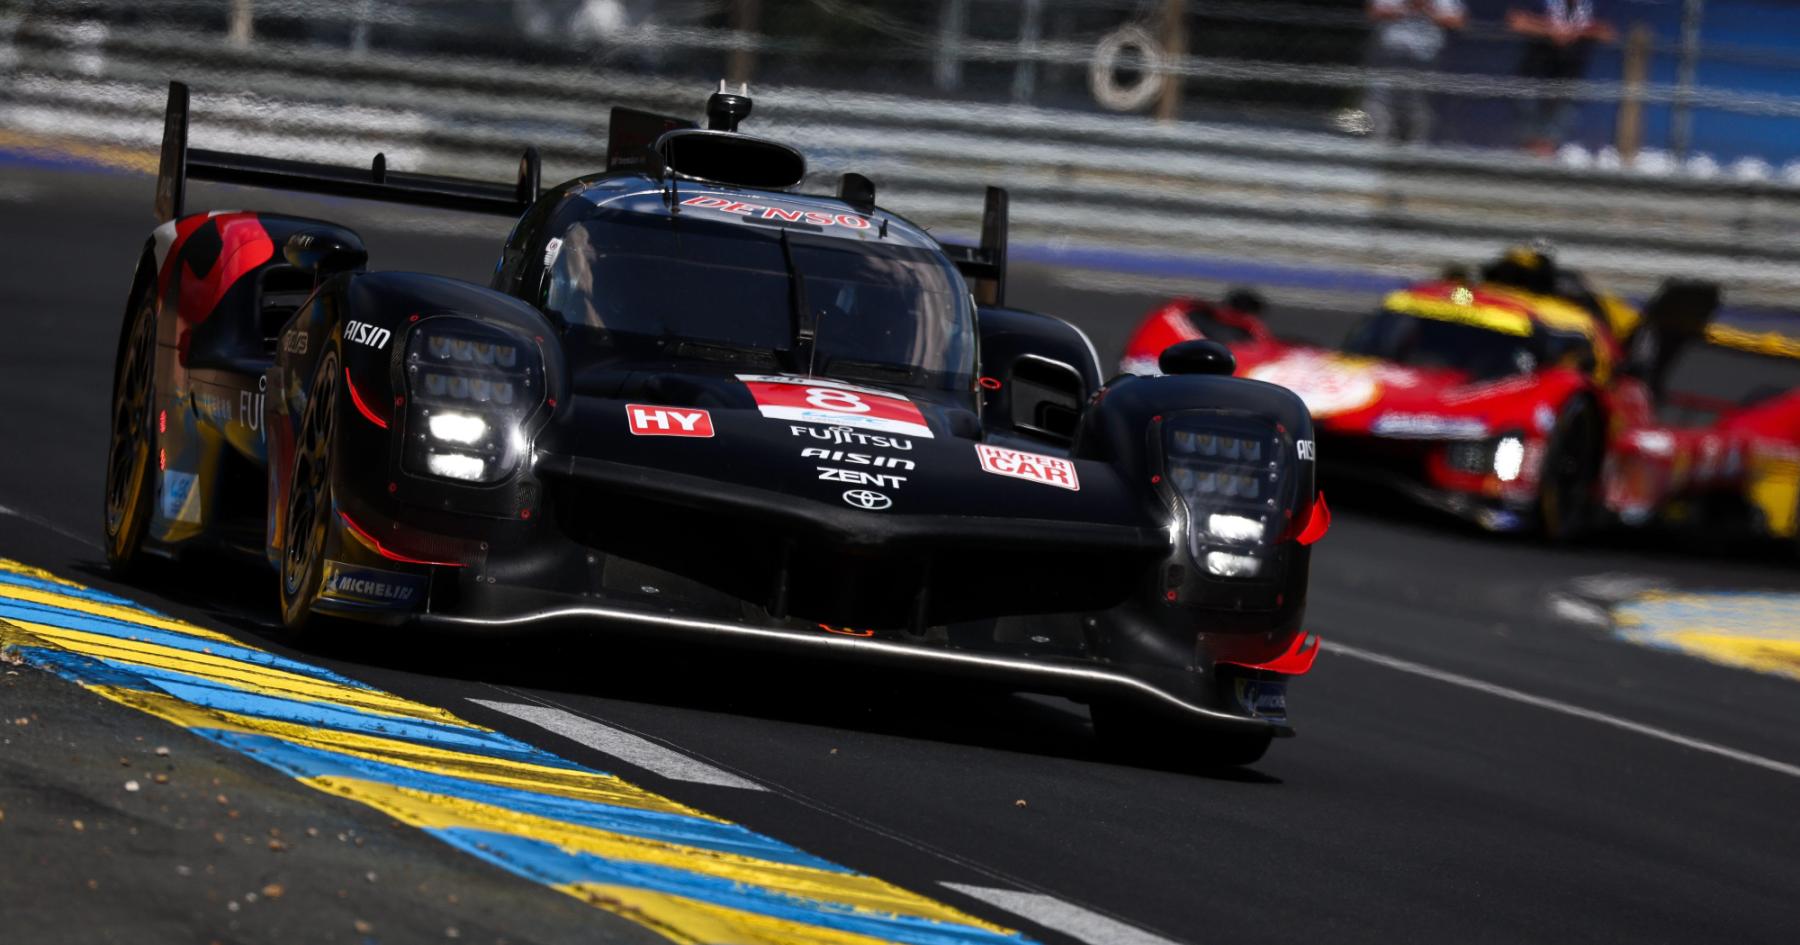 Revving Up for Victory: Dueling Drivers Pursue Prestigious Triple Crown Title at Le Mans